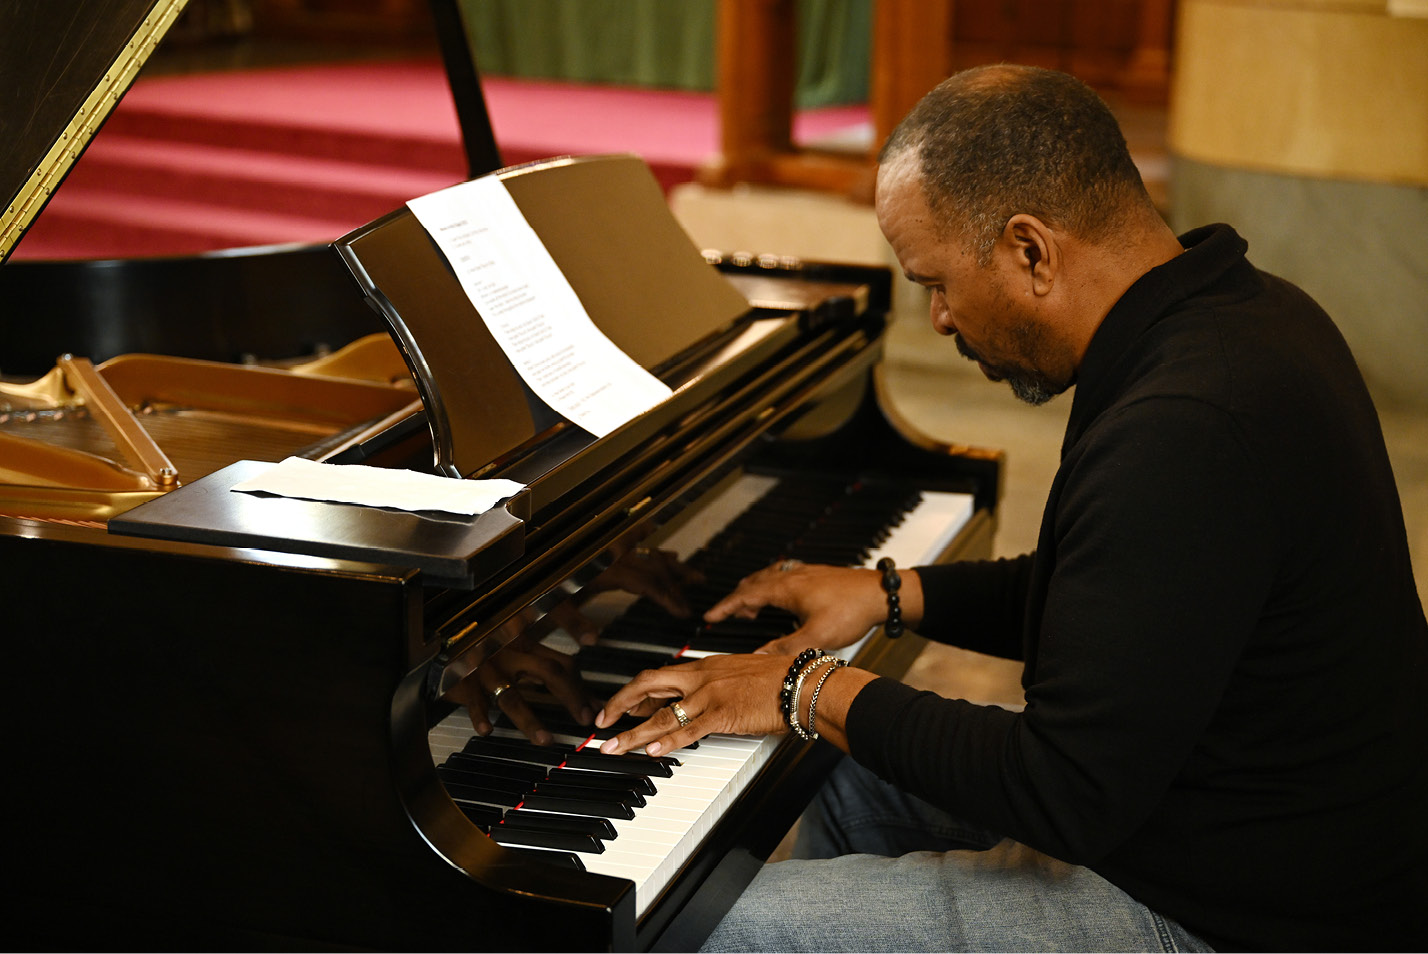 Sean Lilly provides accompaniment on piano at a Music in the Chapel event at Harkness Chapel in February.